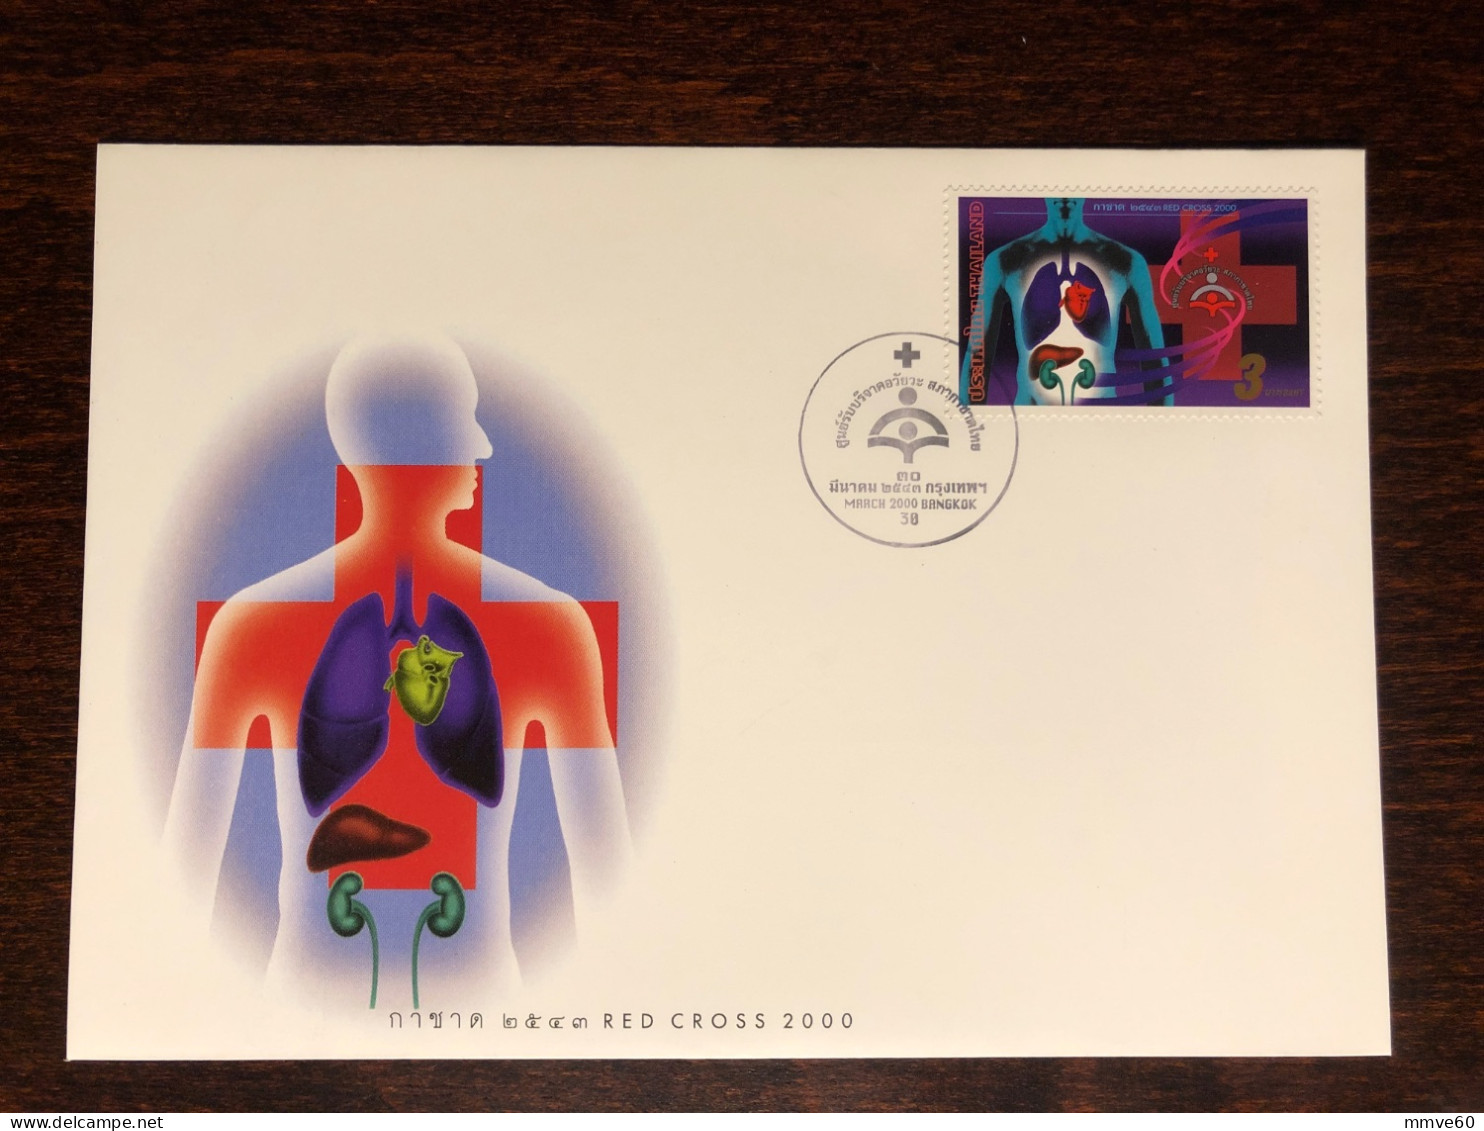 THAILAND FDC COVER 2000 YEAR ORGAN DONATION DONORS HEALTH MEDICINE STAMPS - Tailandia